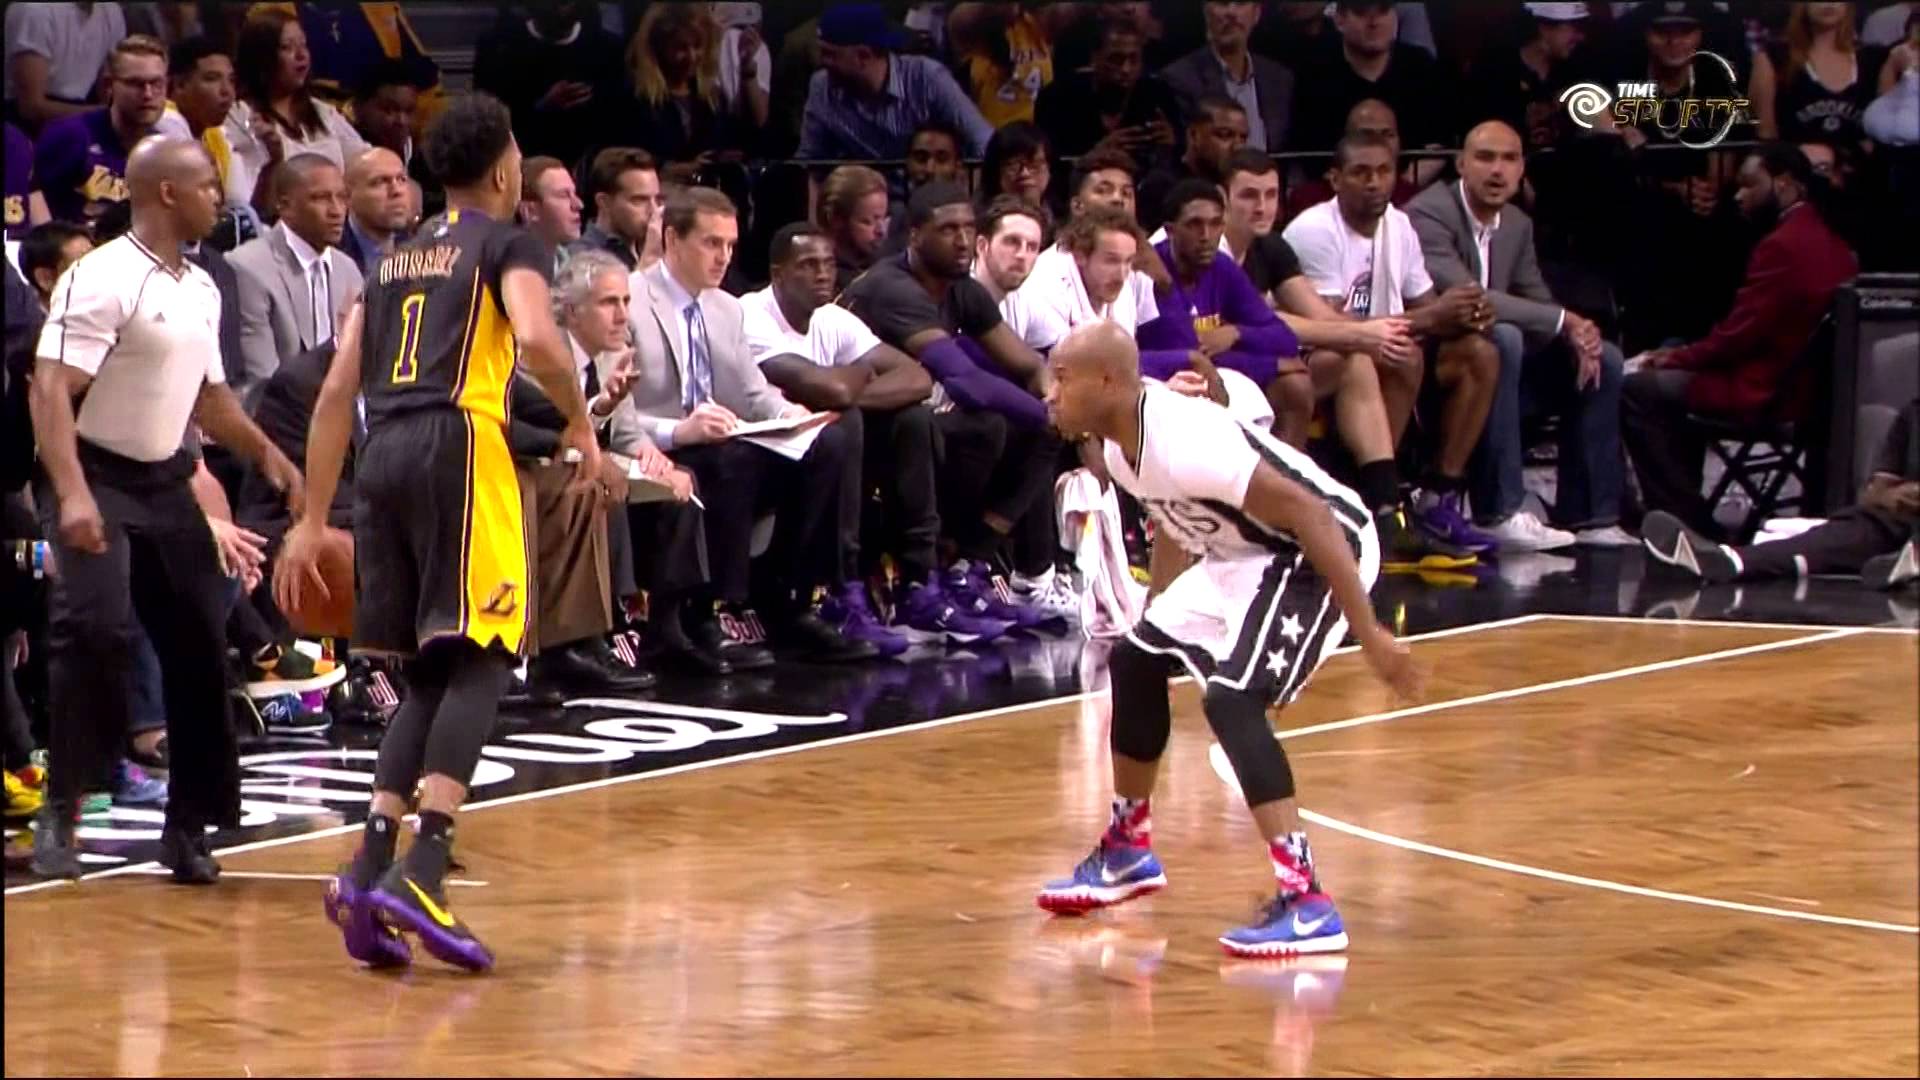 D'Angelo Russell drops Jarret Jack with a nice crossover